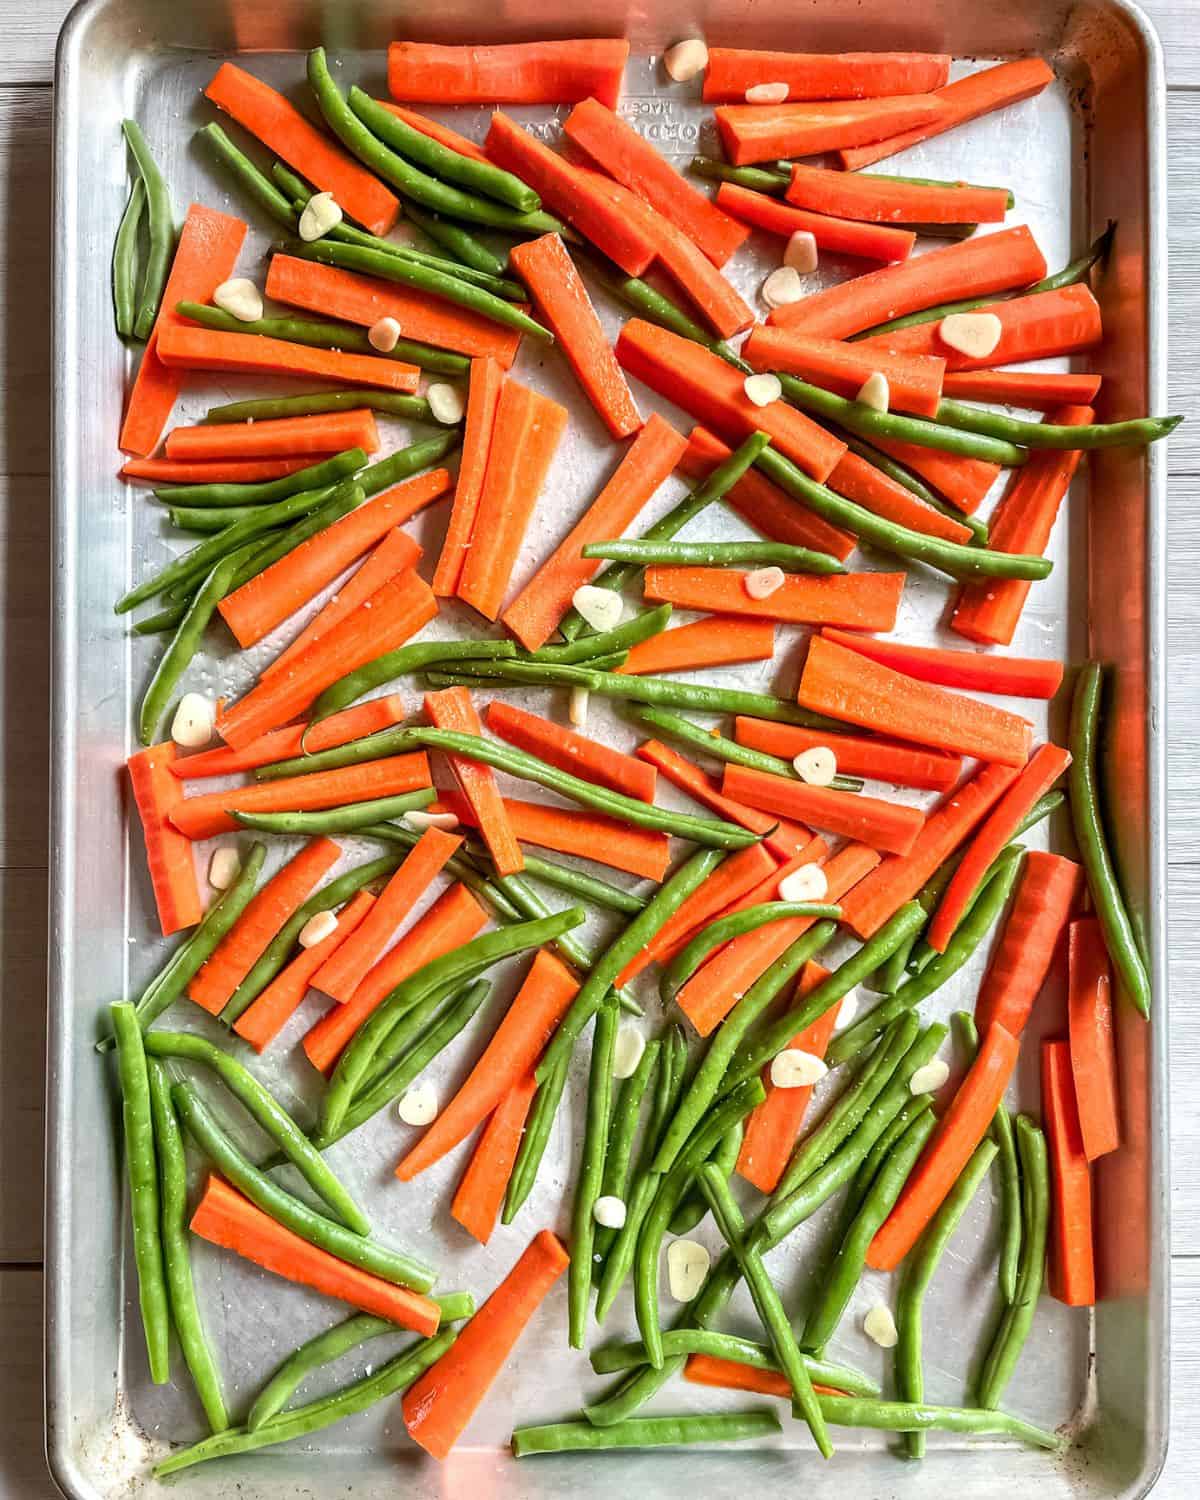 Sliced carrots and green beans on a large sheet pan with slices of garlic, uncooked.